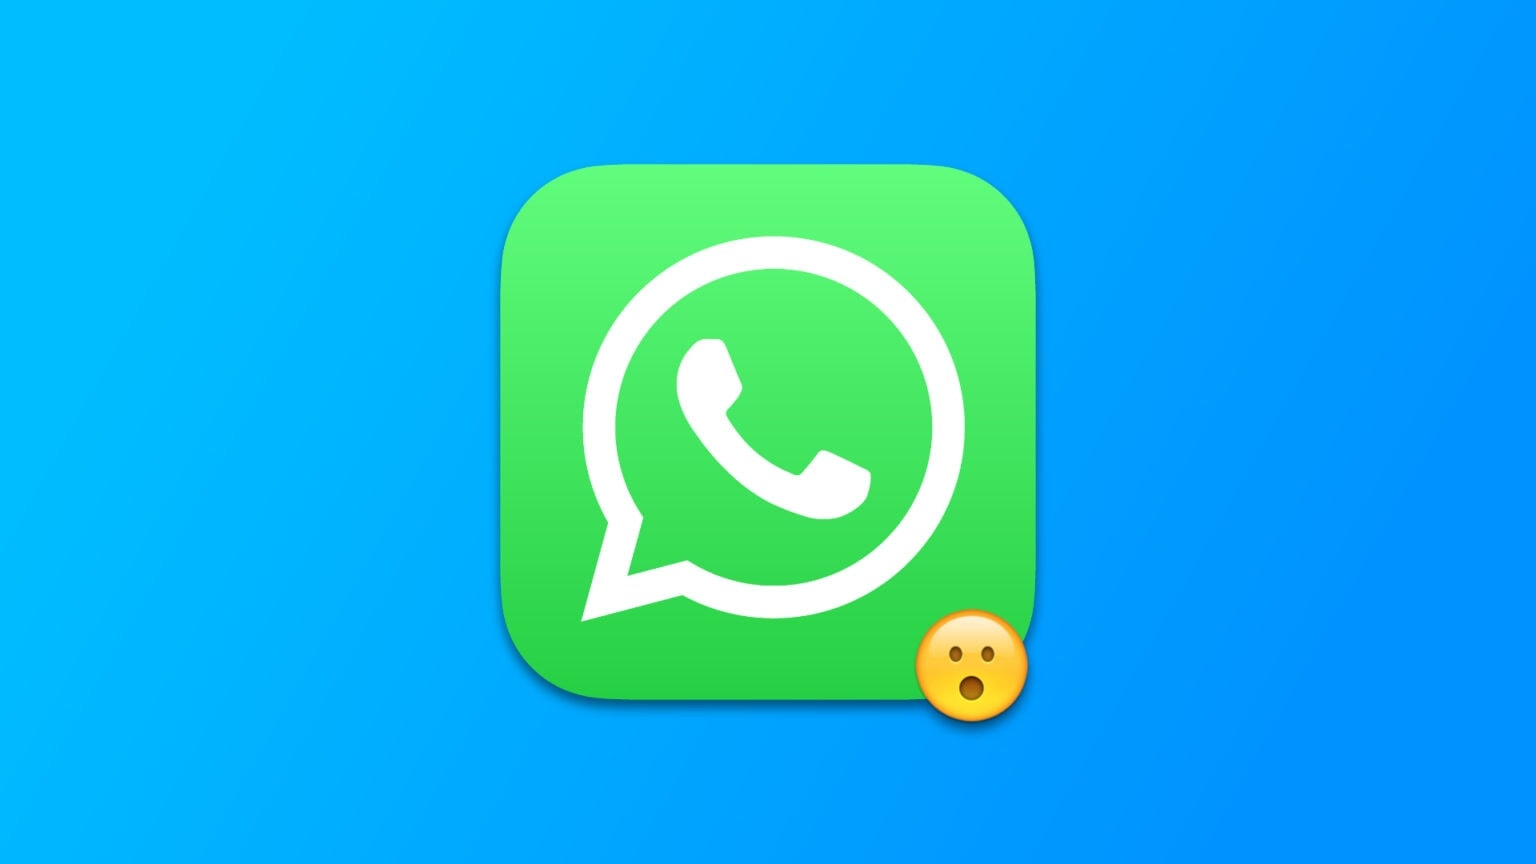 At first, WhatsApp users will have just six emojis to choose from.